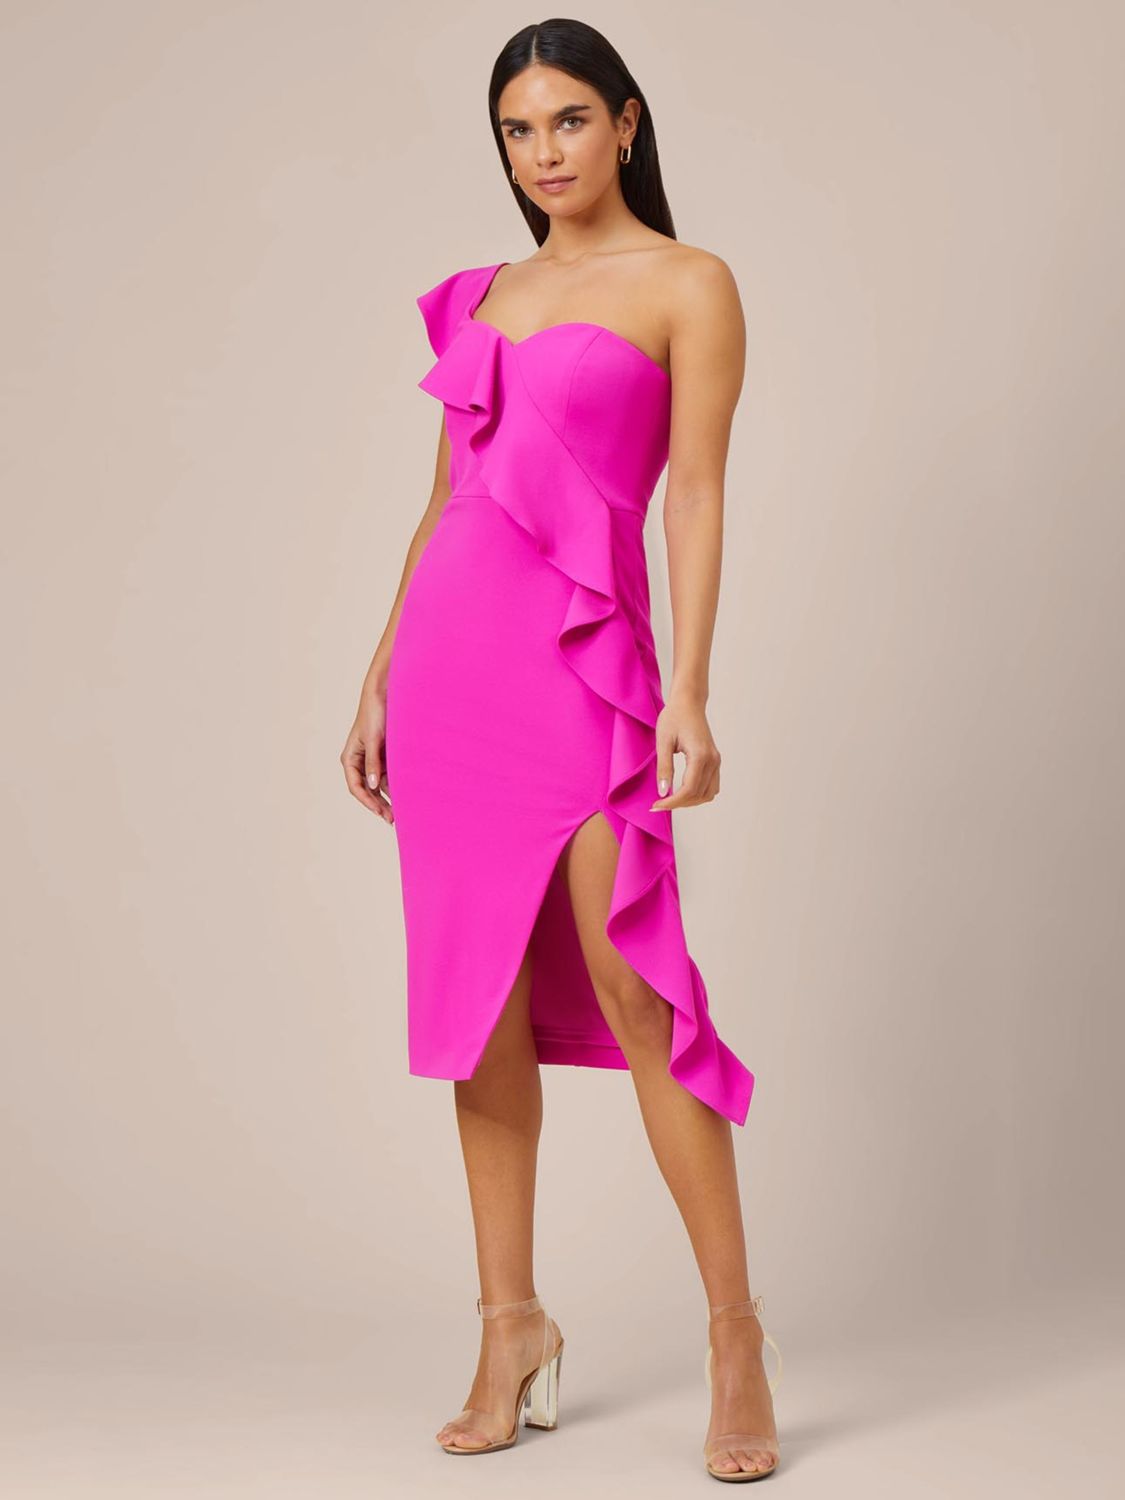 Aidan by Adrianna Papell Knit Crepe Cocktail Dress, Pink Flame, 16